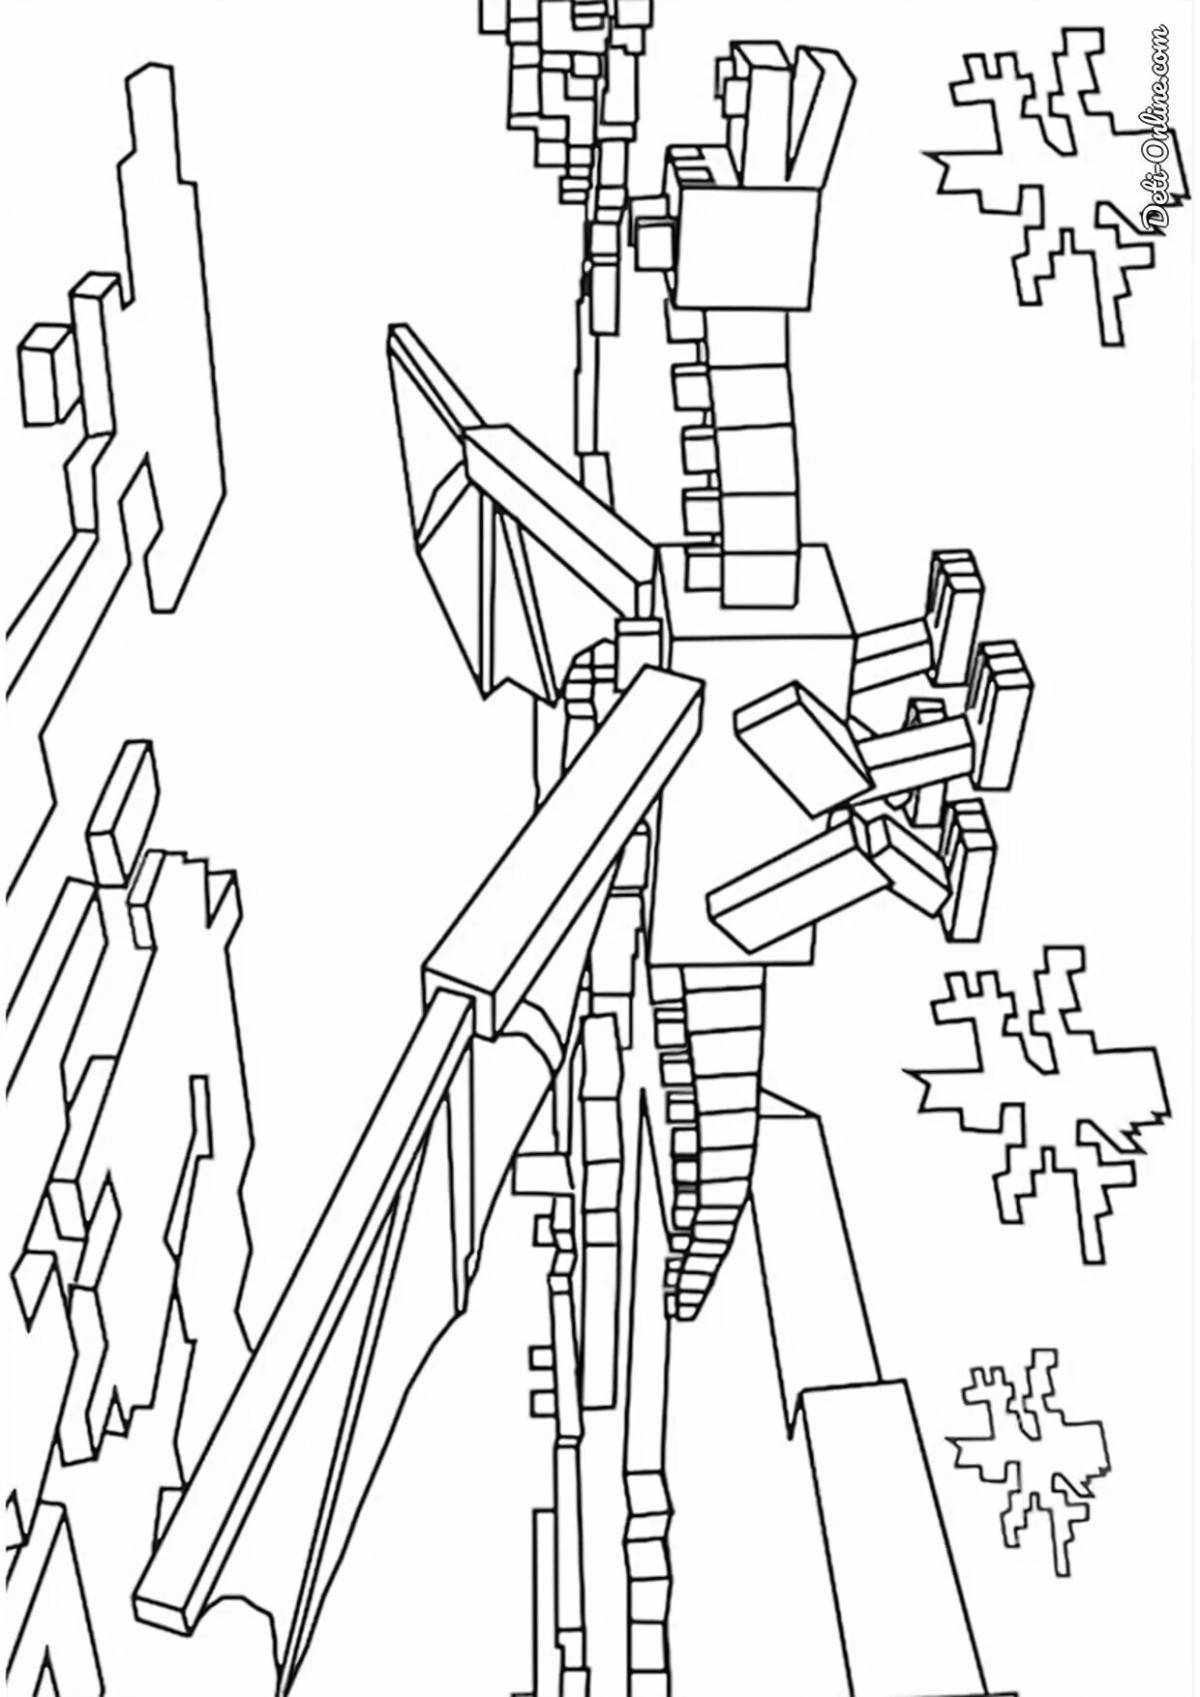 Adorable ender world coloring page